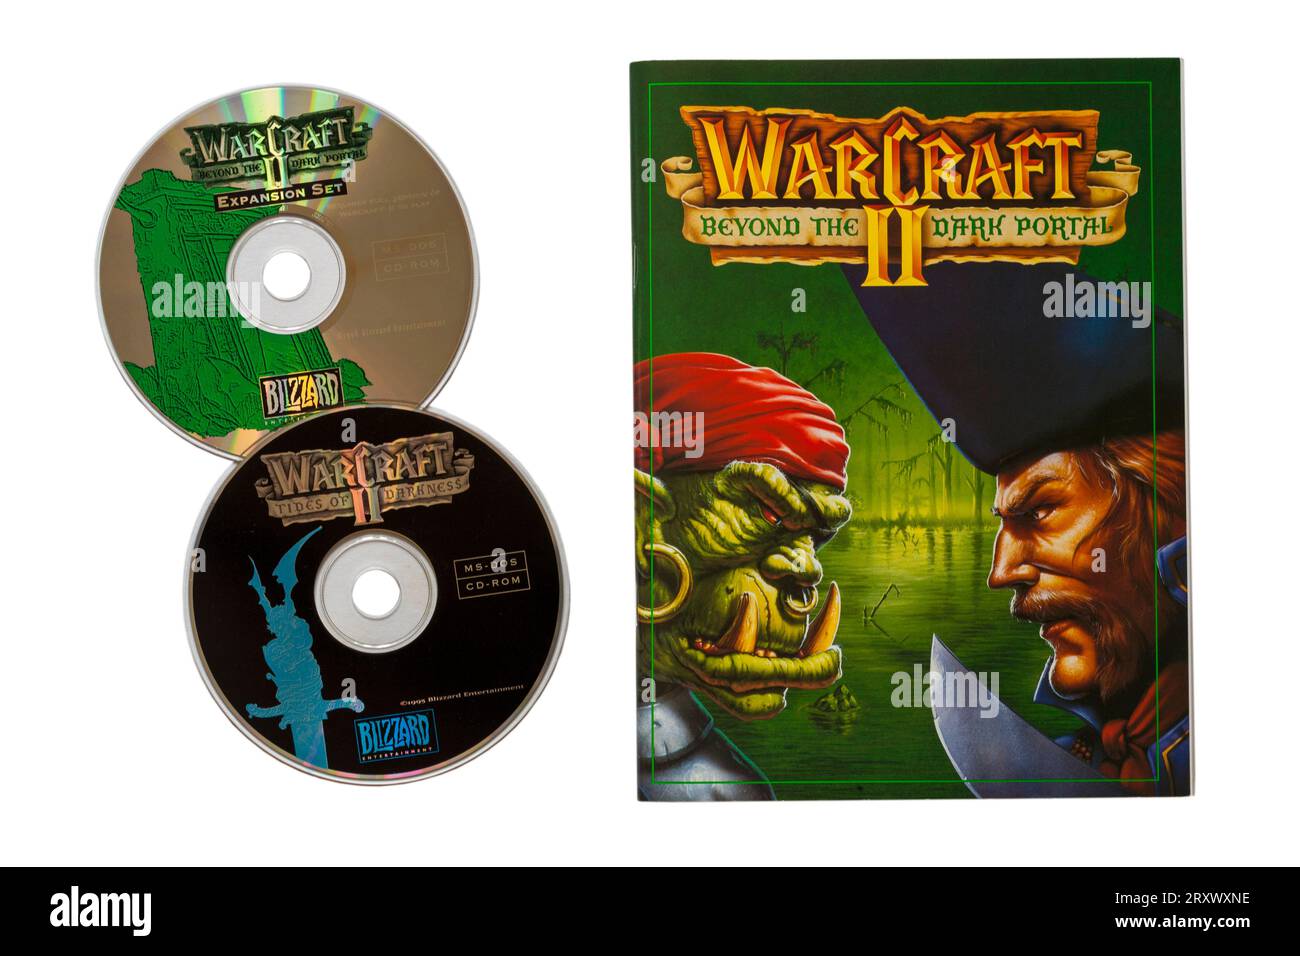 Warcraft II Tides of Darkness deluxe-edition computer game, Warcraft II beyond the dark portal book and discs isolated on white background Stock Photo